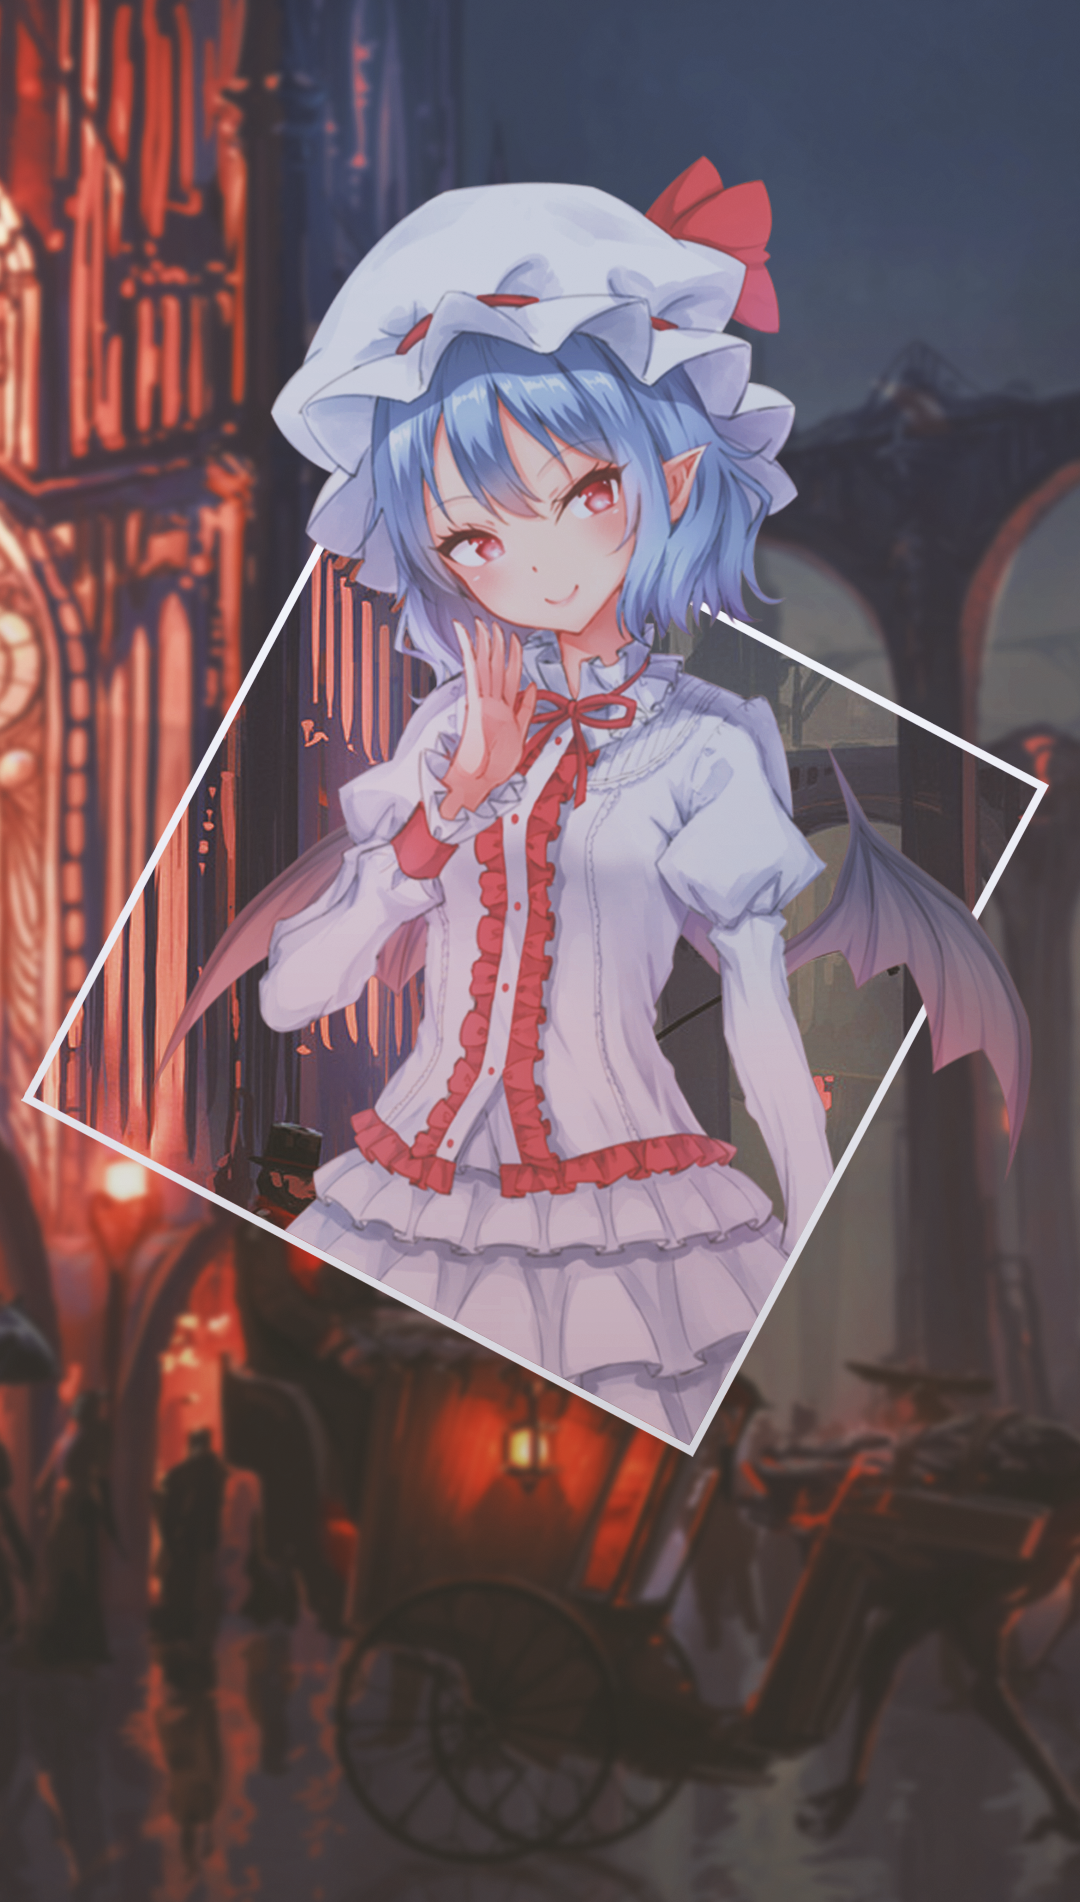 Anime 1080x1902 anime anime girls picture-in-picture Touhou Remilia Scarlet